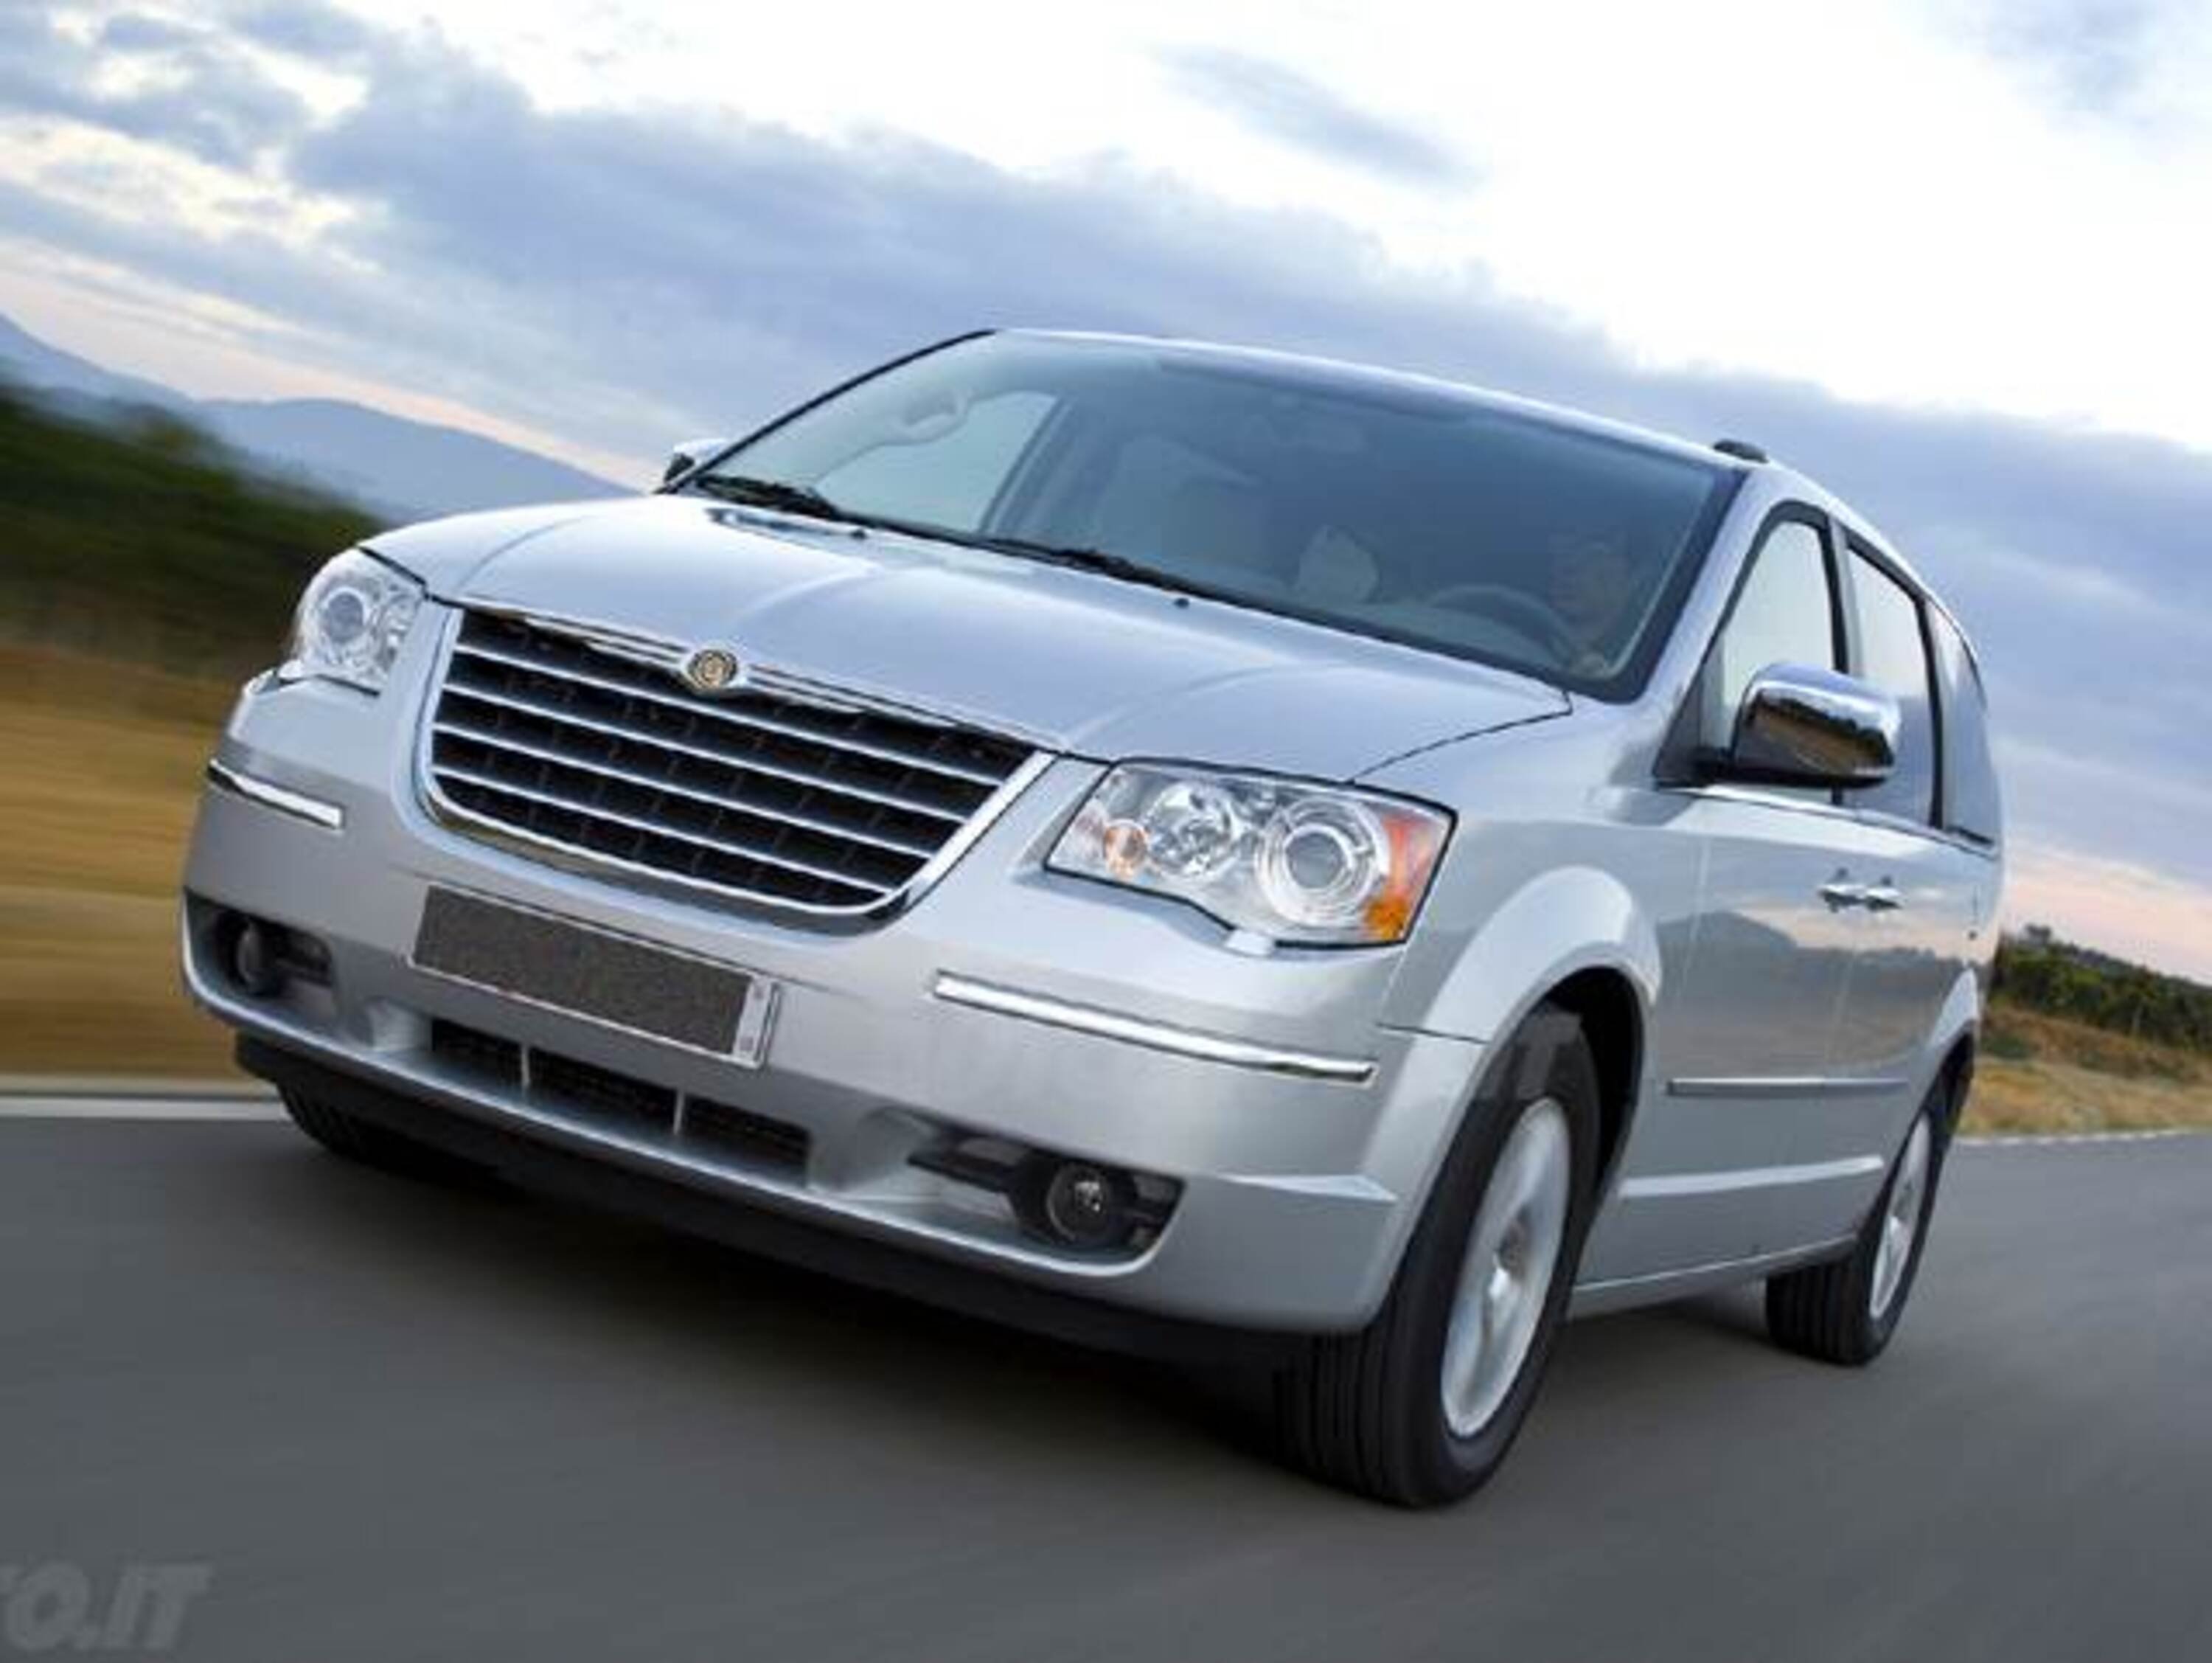 Chrysler Grand Voyager Grand Voyager 2.8 CRD DPF LX